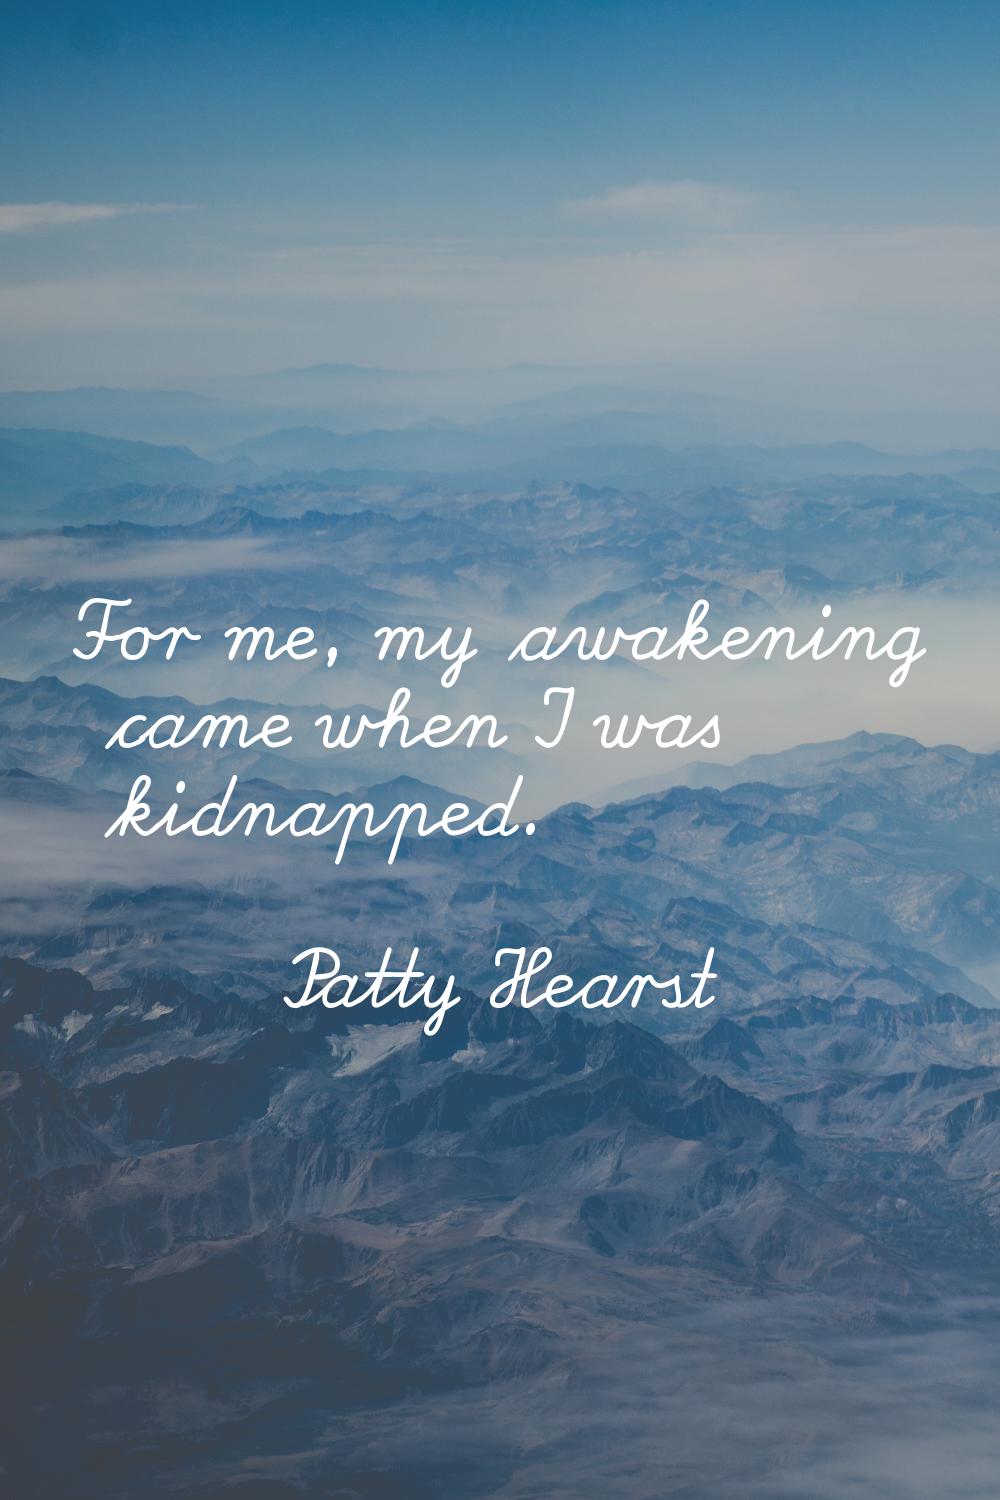 For me, my awakening came when I was kidnapped.